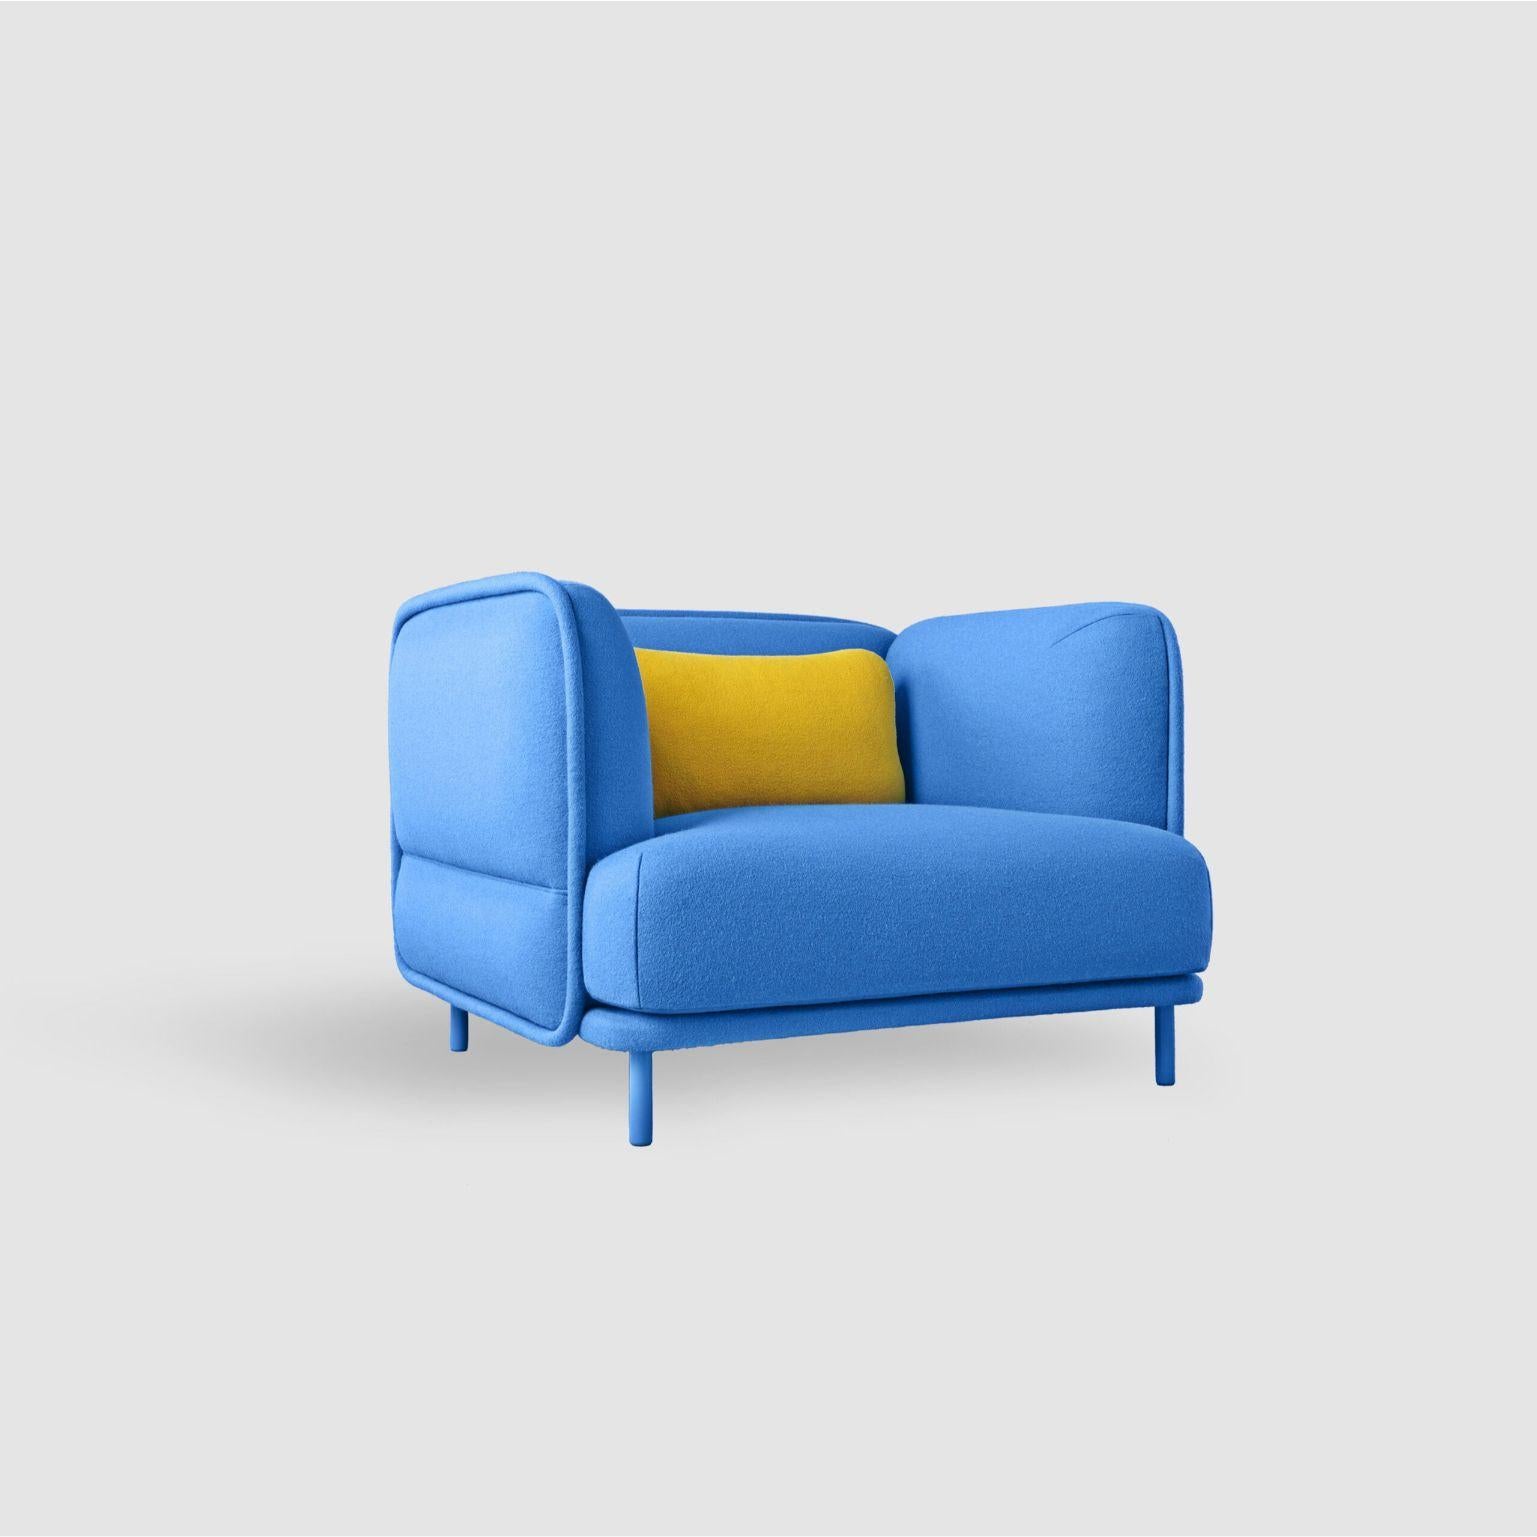 Hug armchair - Blue by Cristian Reyes
Dimensions: W108, D95, H73, Seat 43
Materials: Pine wood structure reinforced with plywood and tablex
Backrest is 50% goose feather and 50% wadding
Foam CMHR (high resilience and flame retardant) for all our